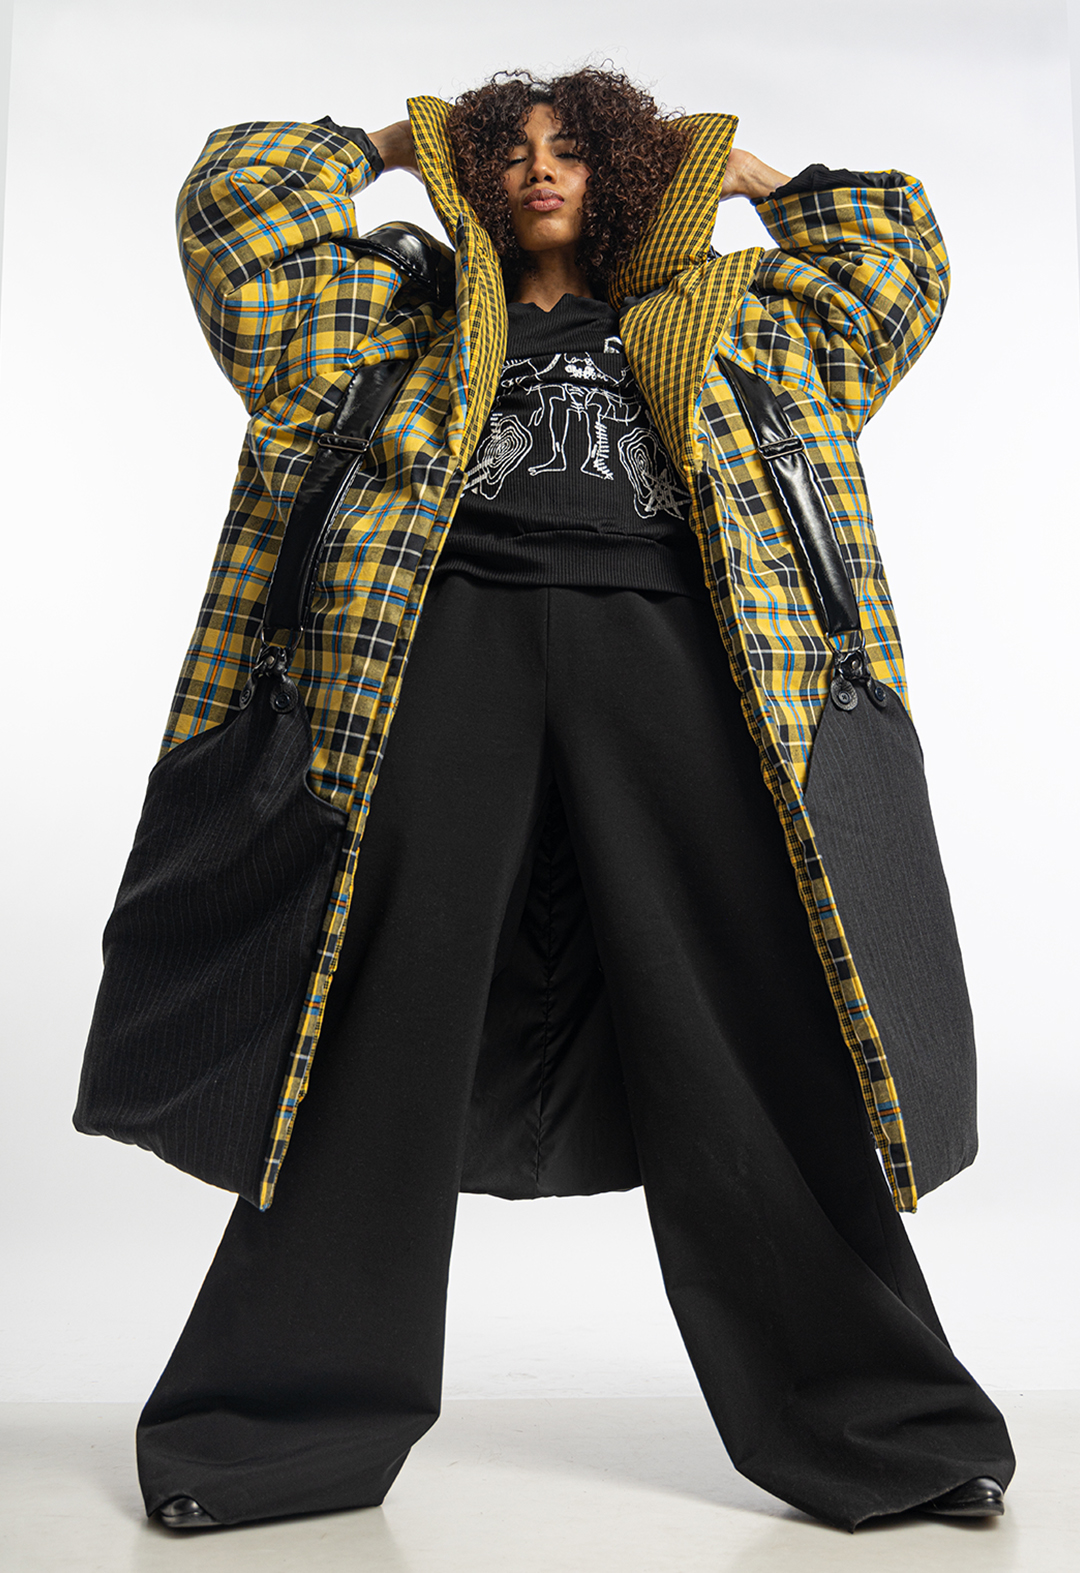 A model is wearing a yellow plaid padded coat with oversized padding, a wide yellow tartan collar, and huge pinstripe pockets, over a sweatshirt and black flare pants